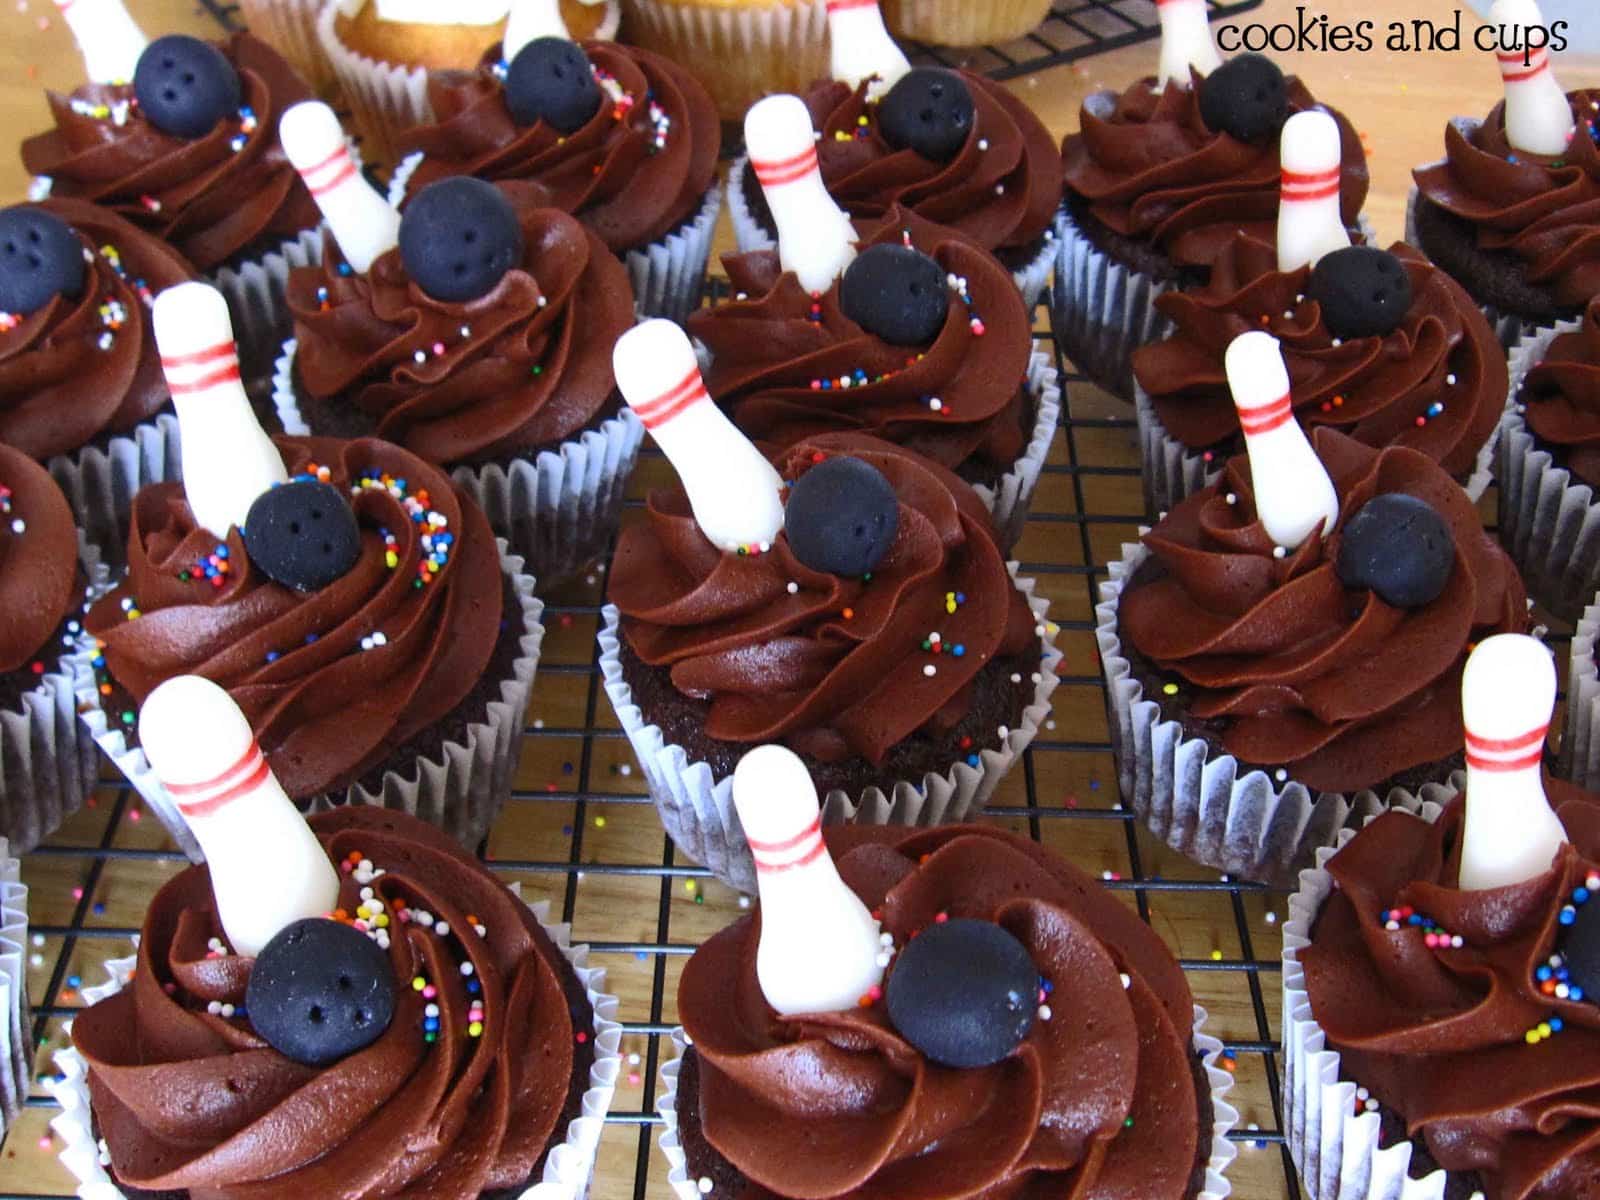 Close-up of chocolate cupcakes with bowling pin decorations